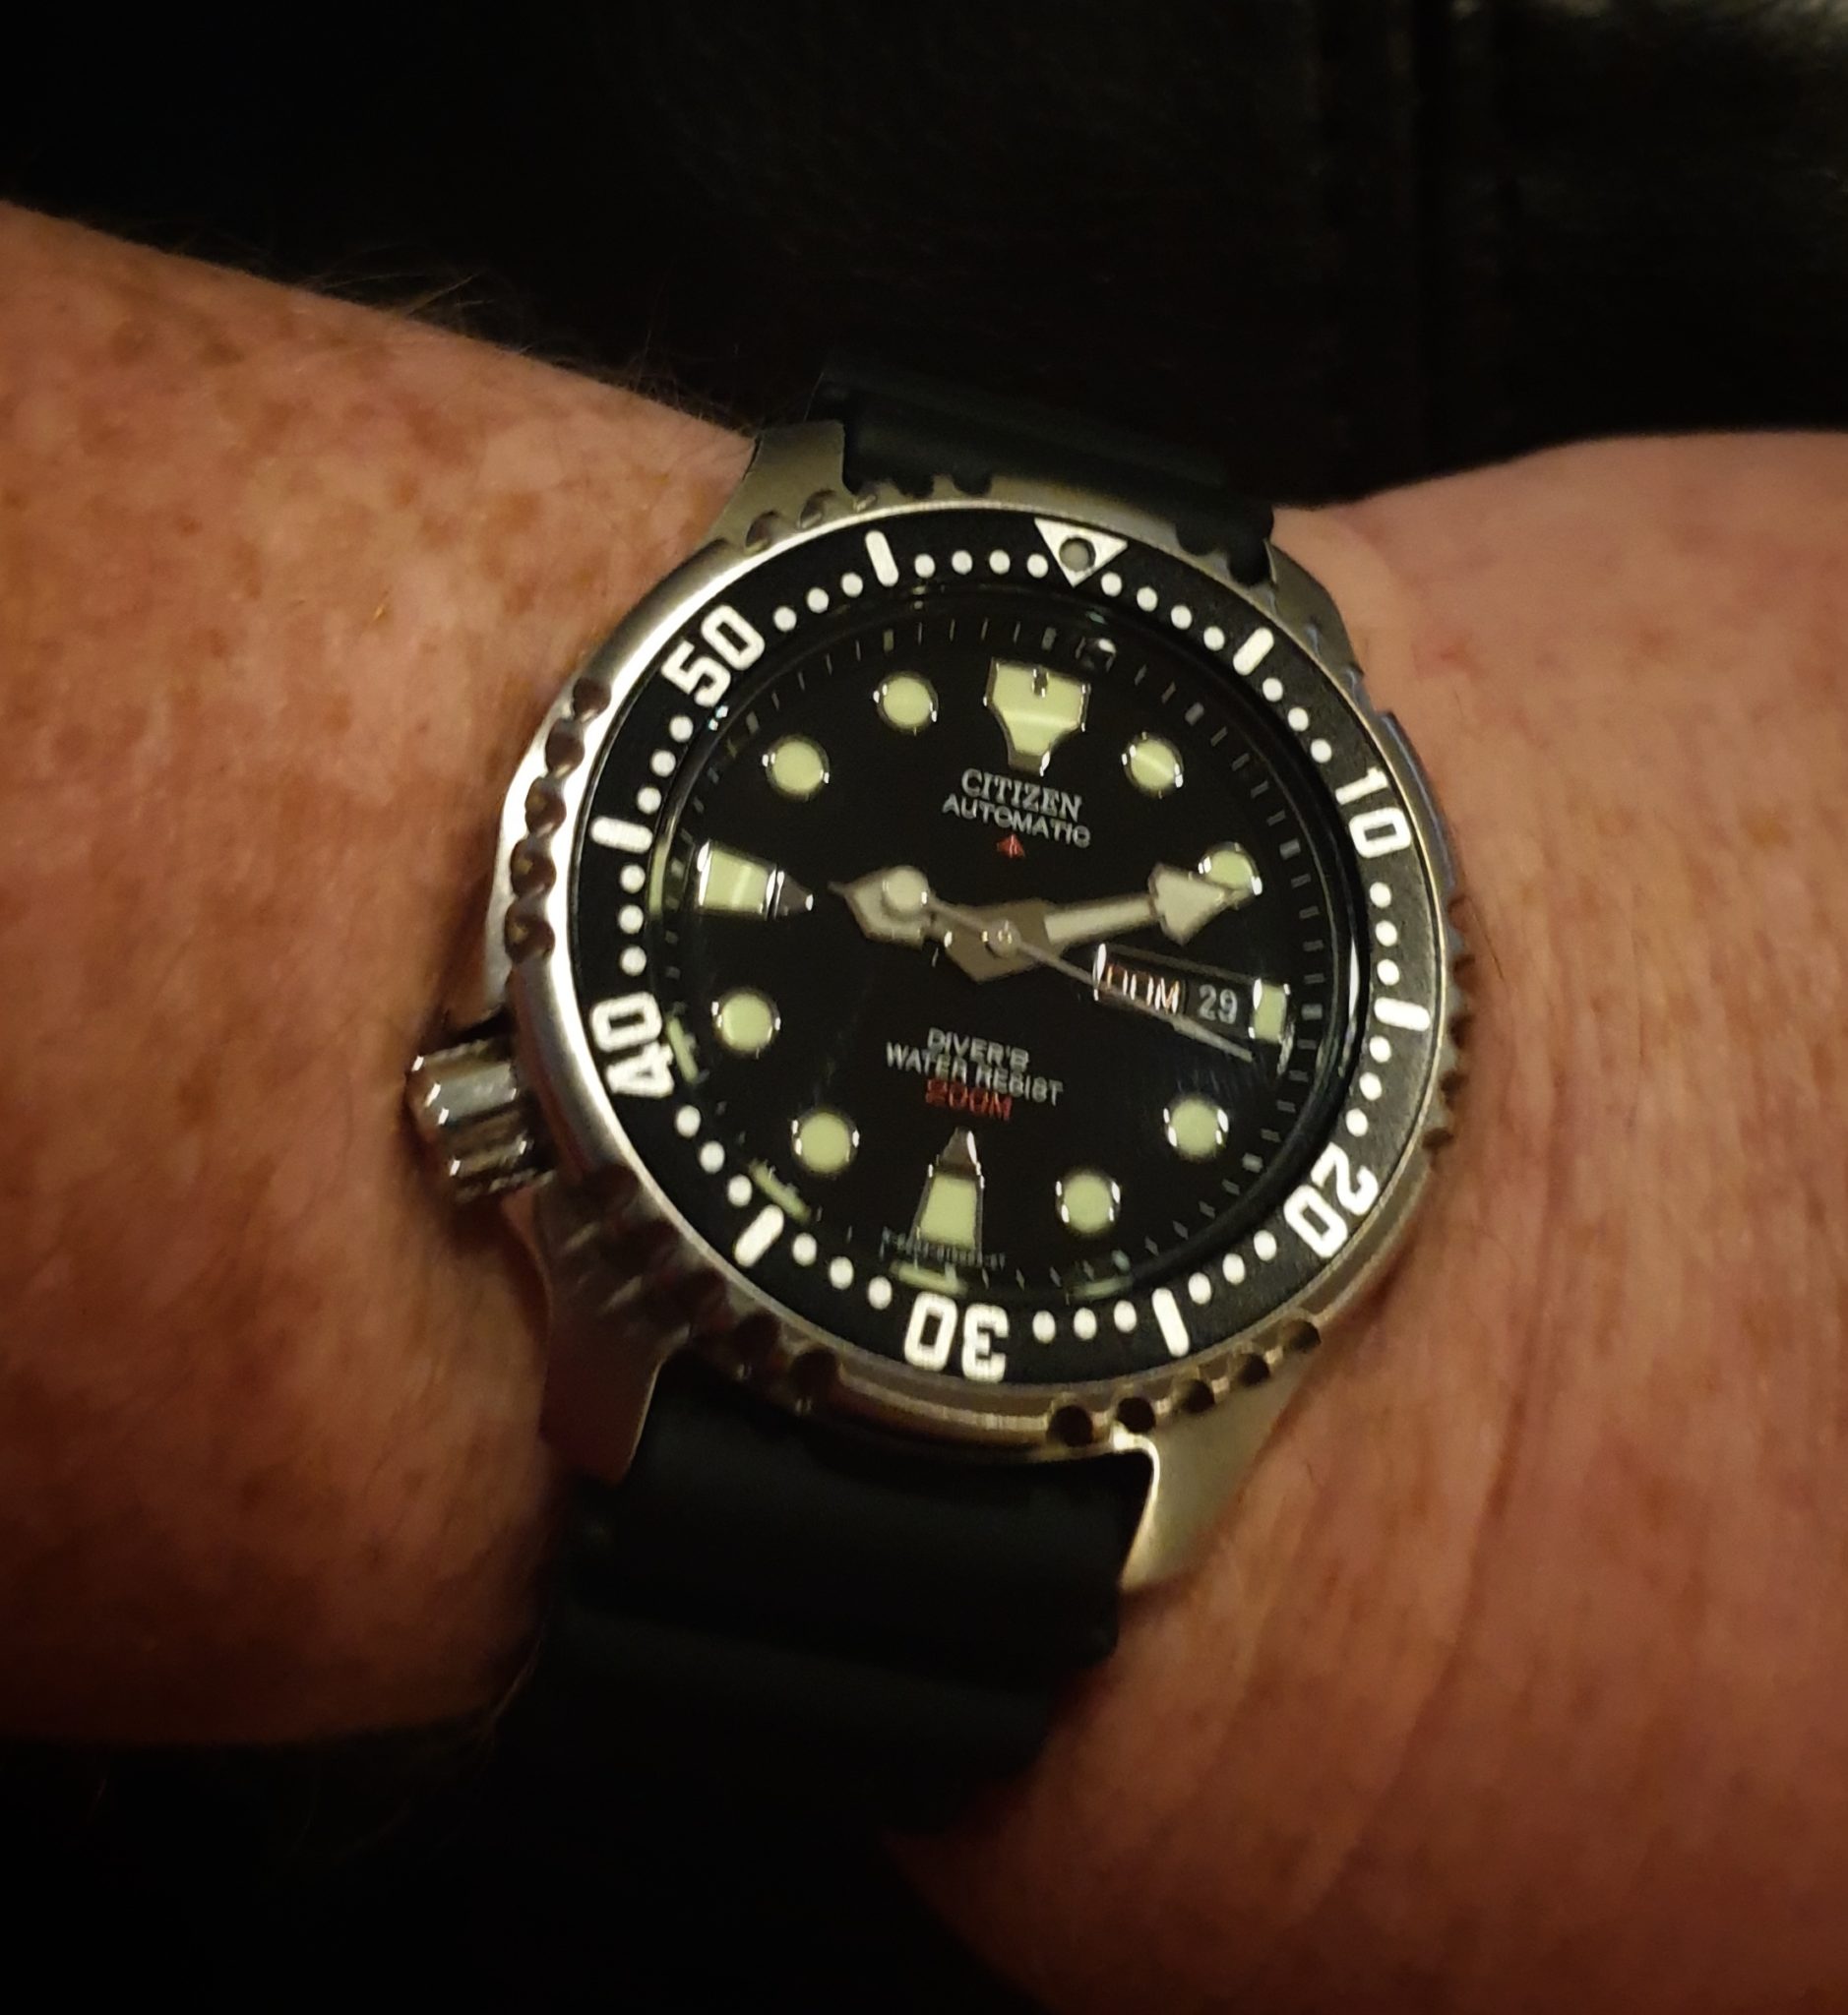 Owner Review: Citizen Promaster Diver NY0040-41e